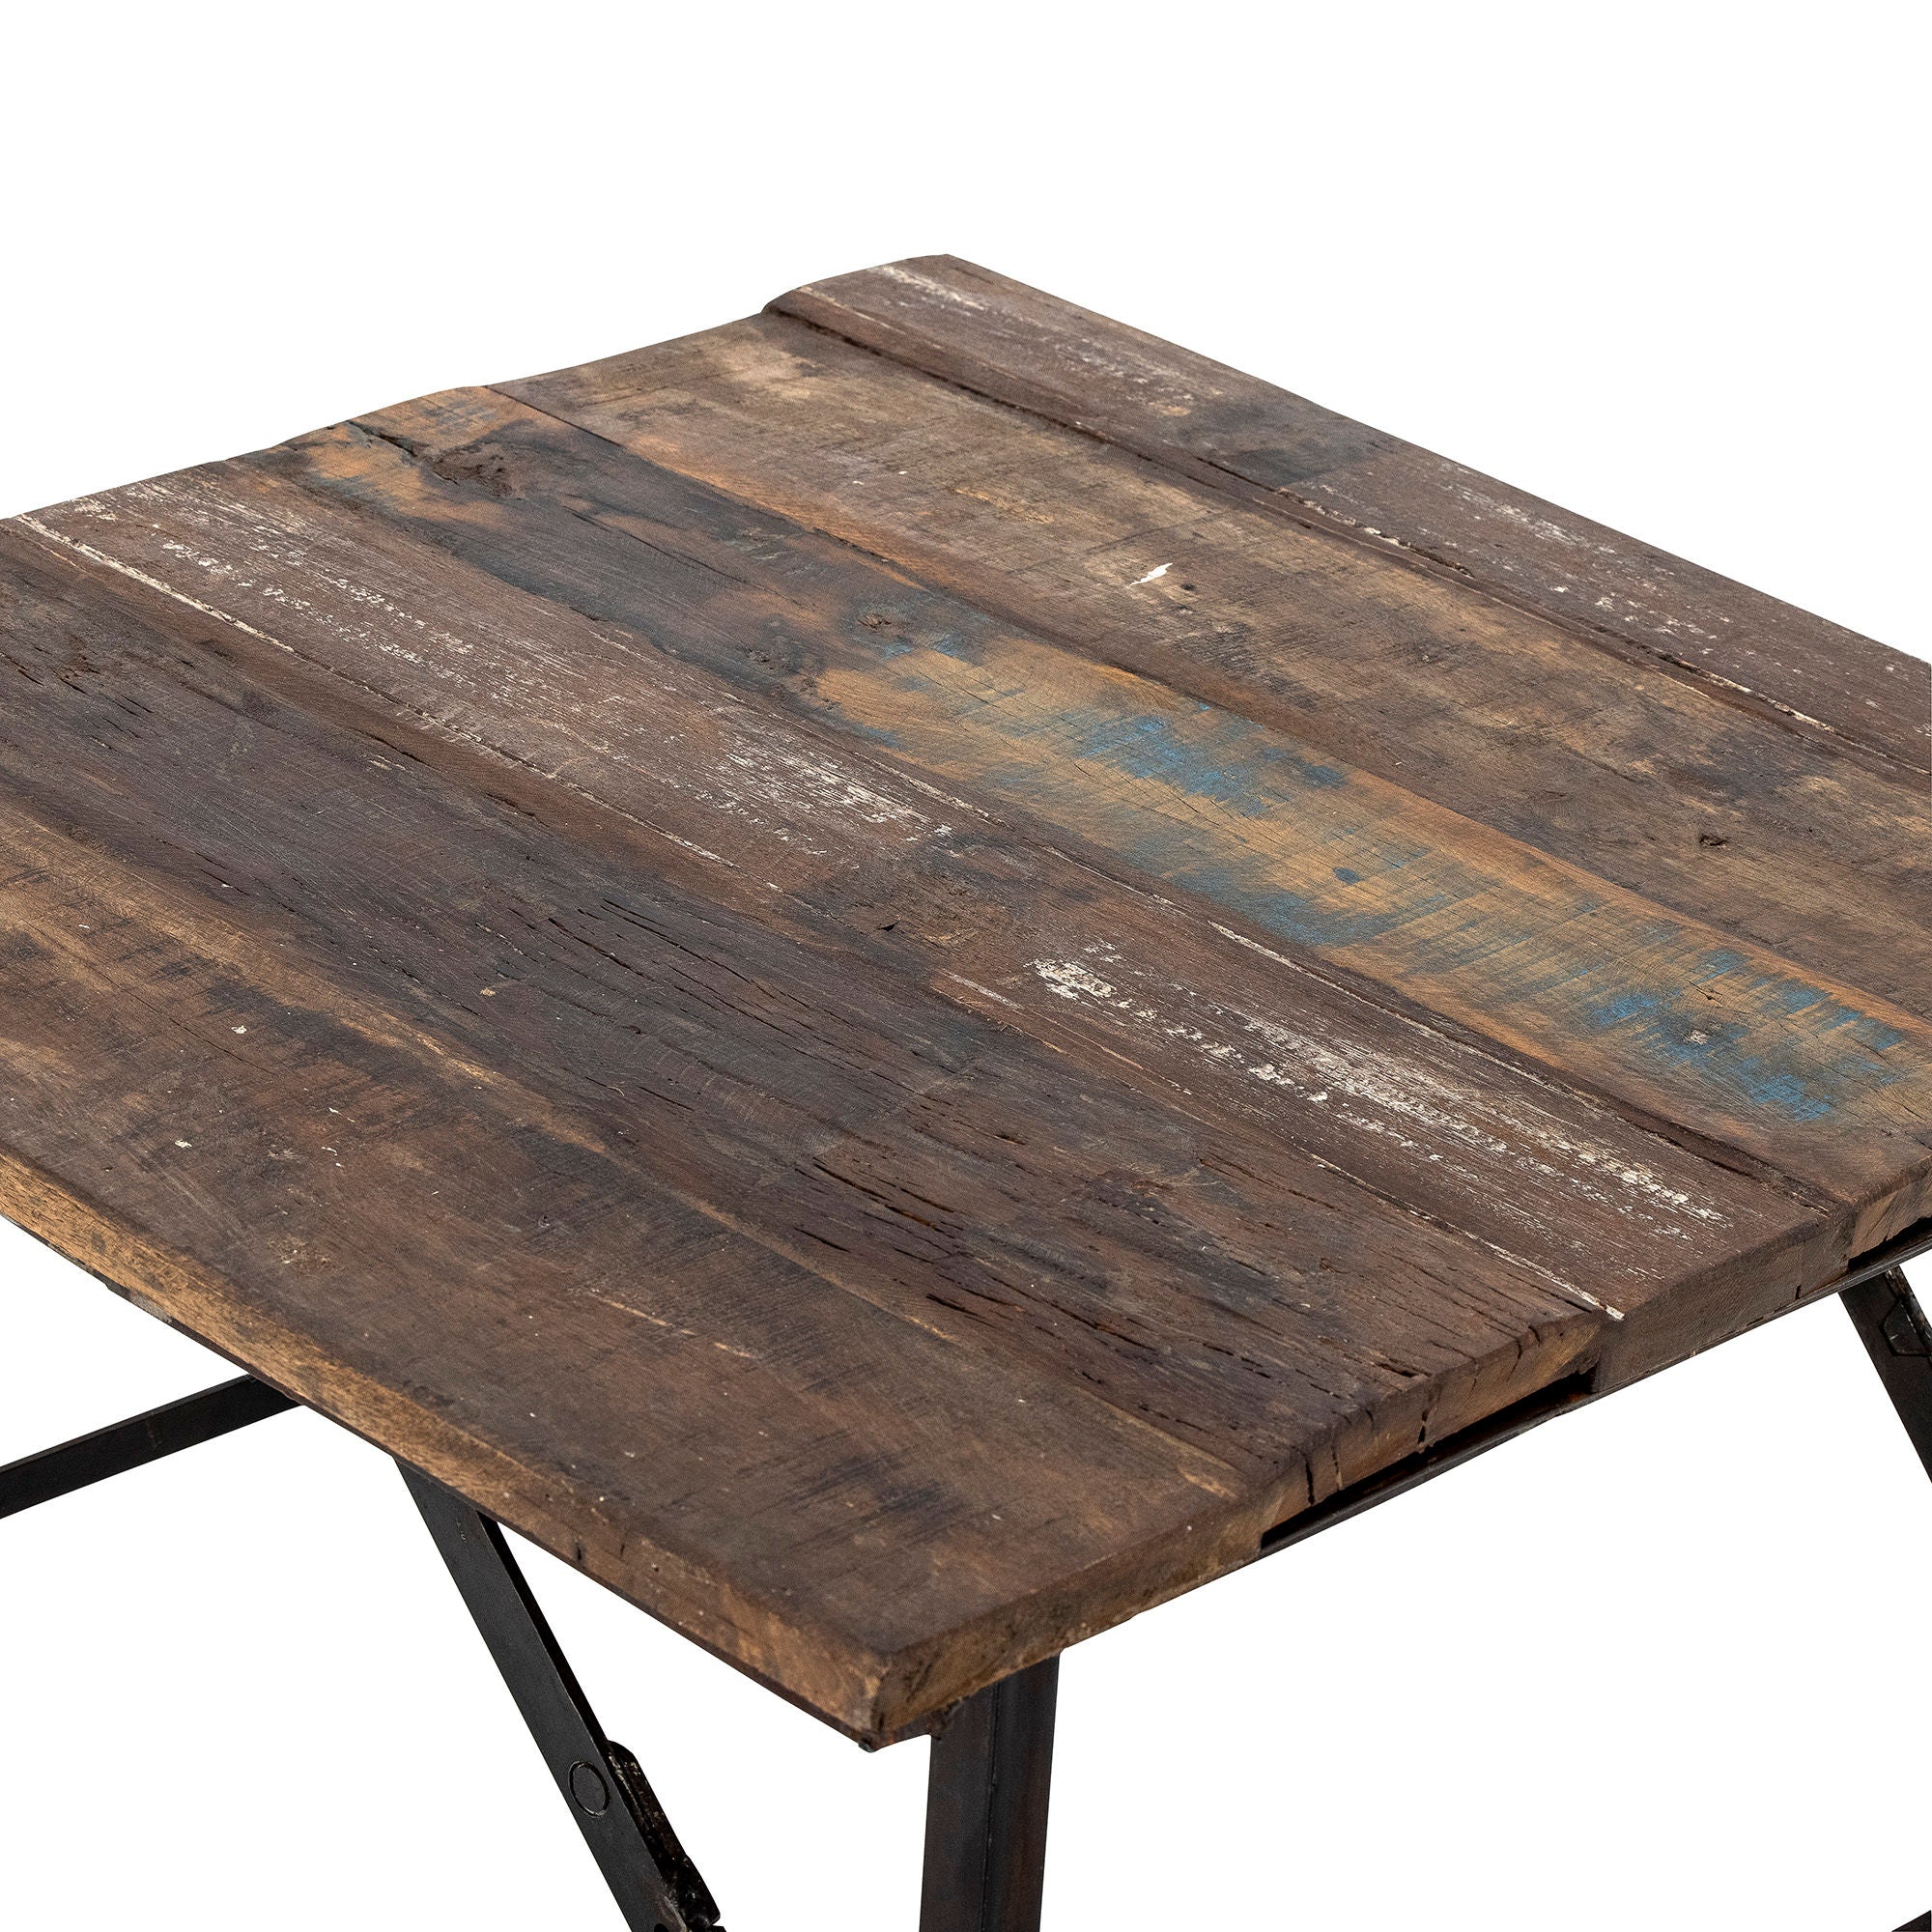 Creative Collection Loft Coffee Table, Brown, Reclaimed Wood